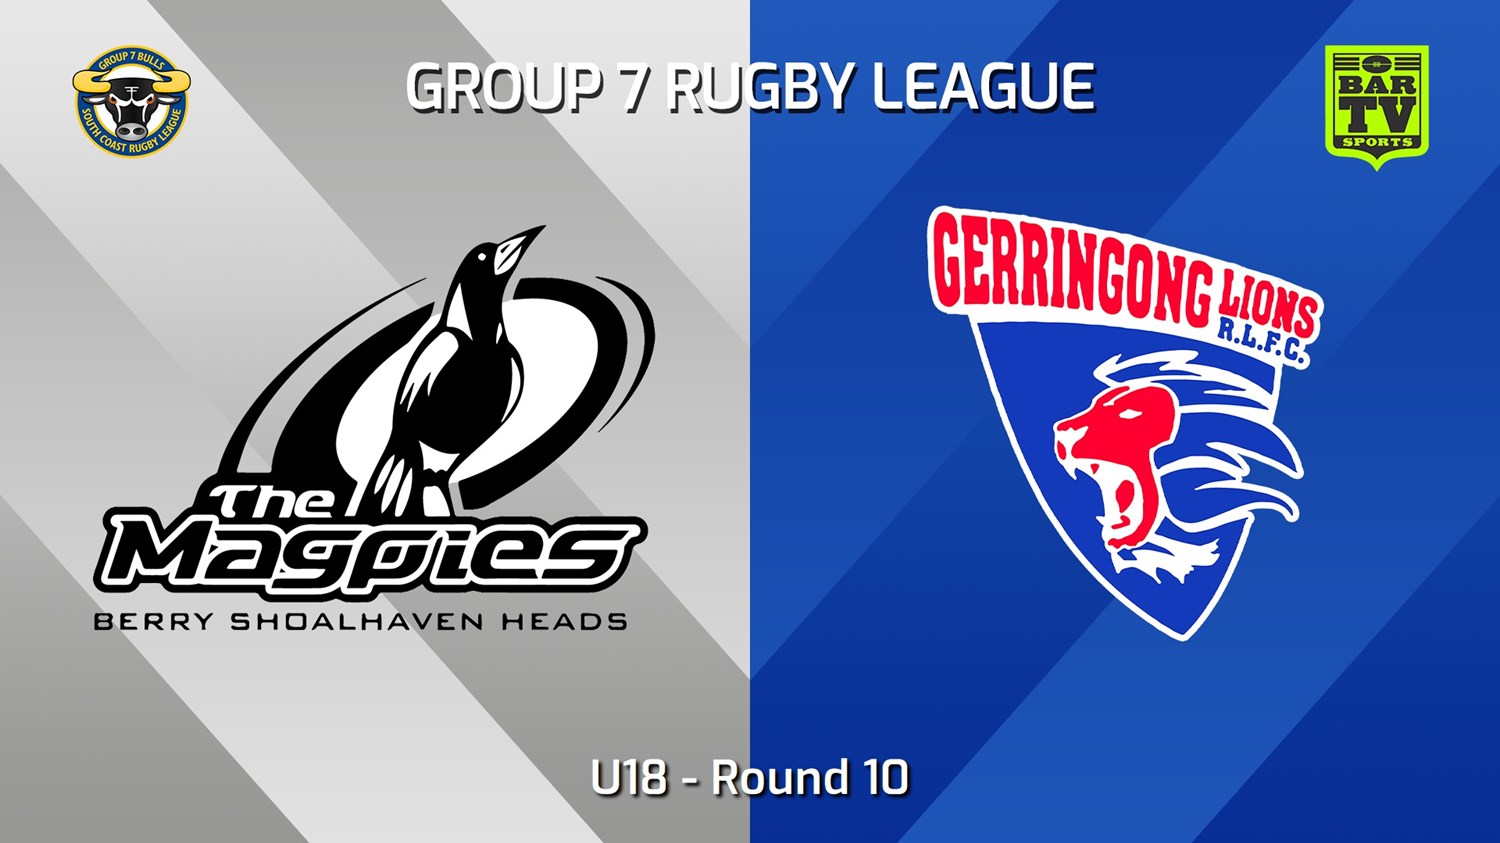 240615-video-South Coast Round 10 - U18 - Berry-Shoalhaven Heads Magpies v Gerringong Lions Slate Image